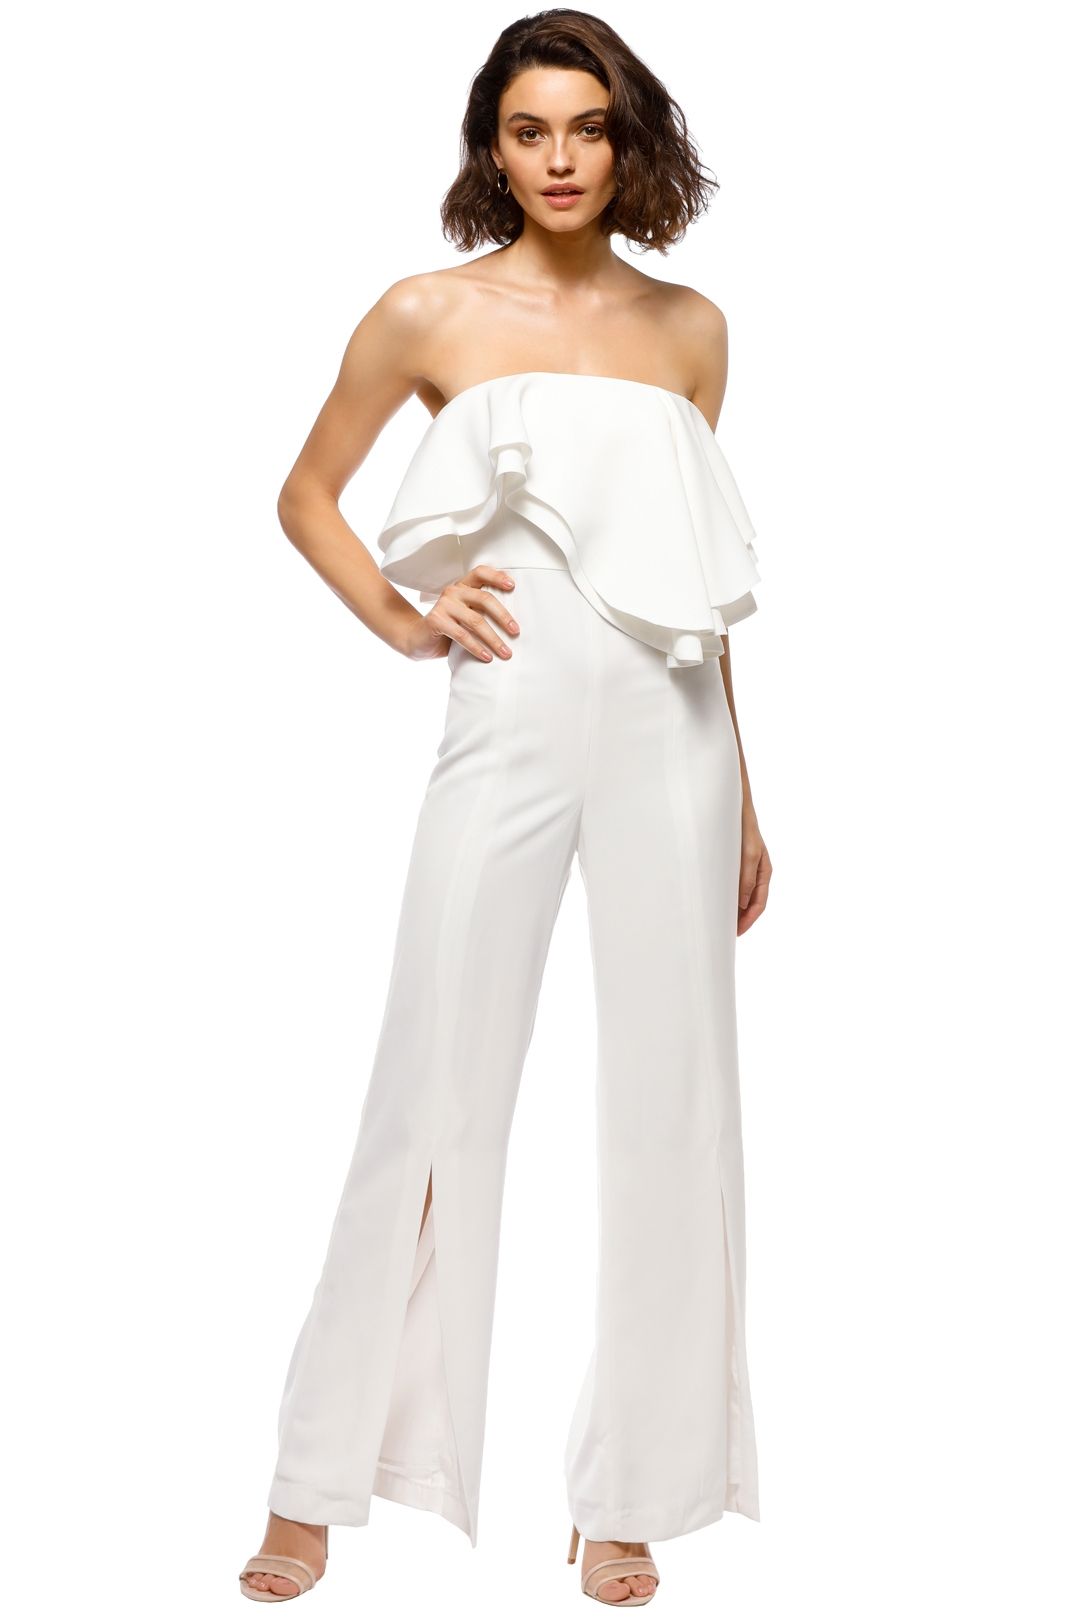 C_MEO - With You Jumpsuit - White - Front